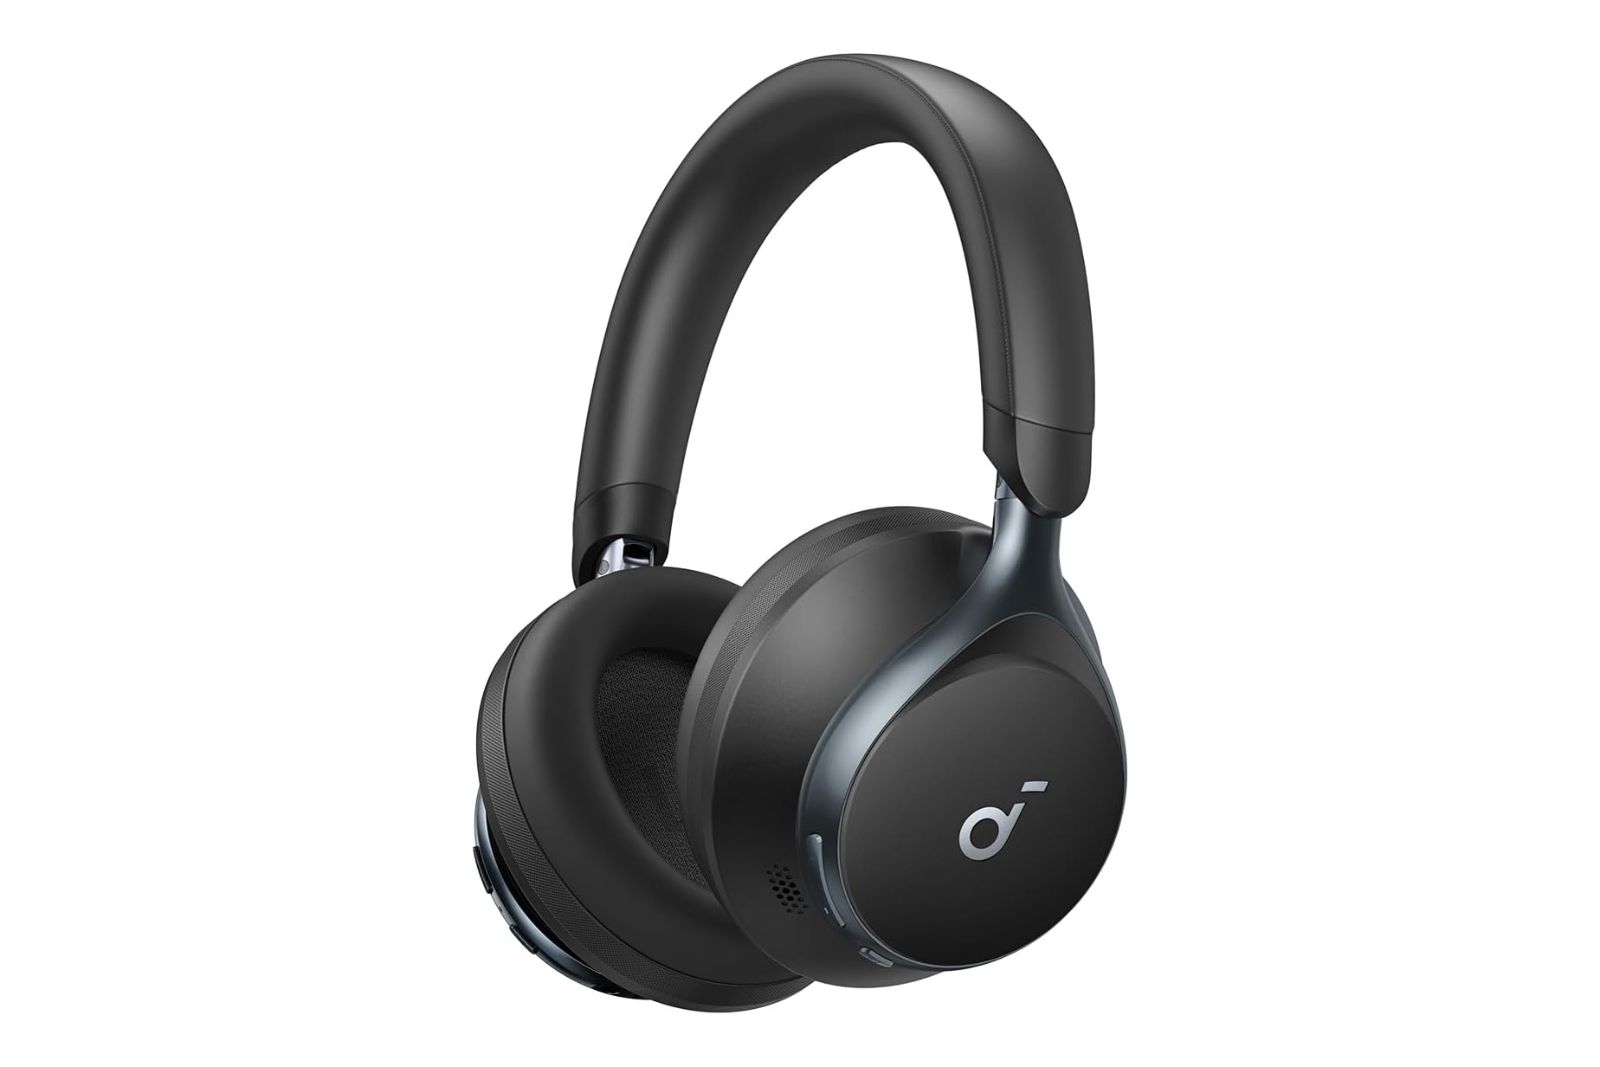 Black headphones with a music note on the ear cups.